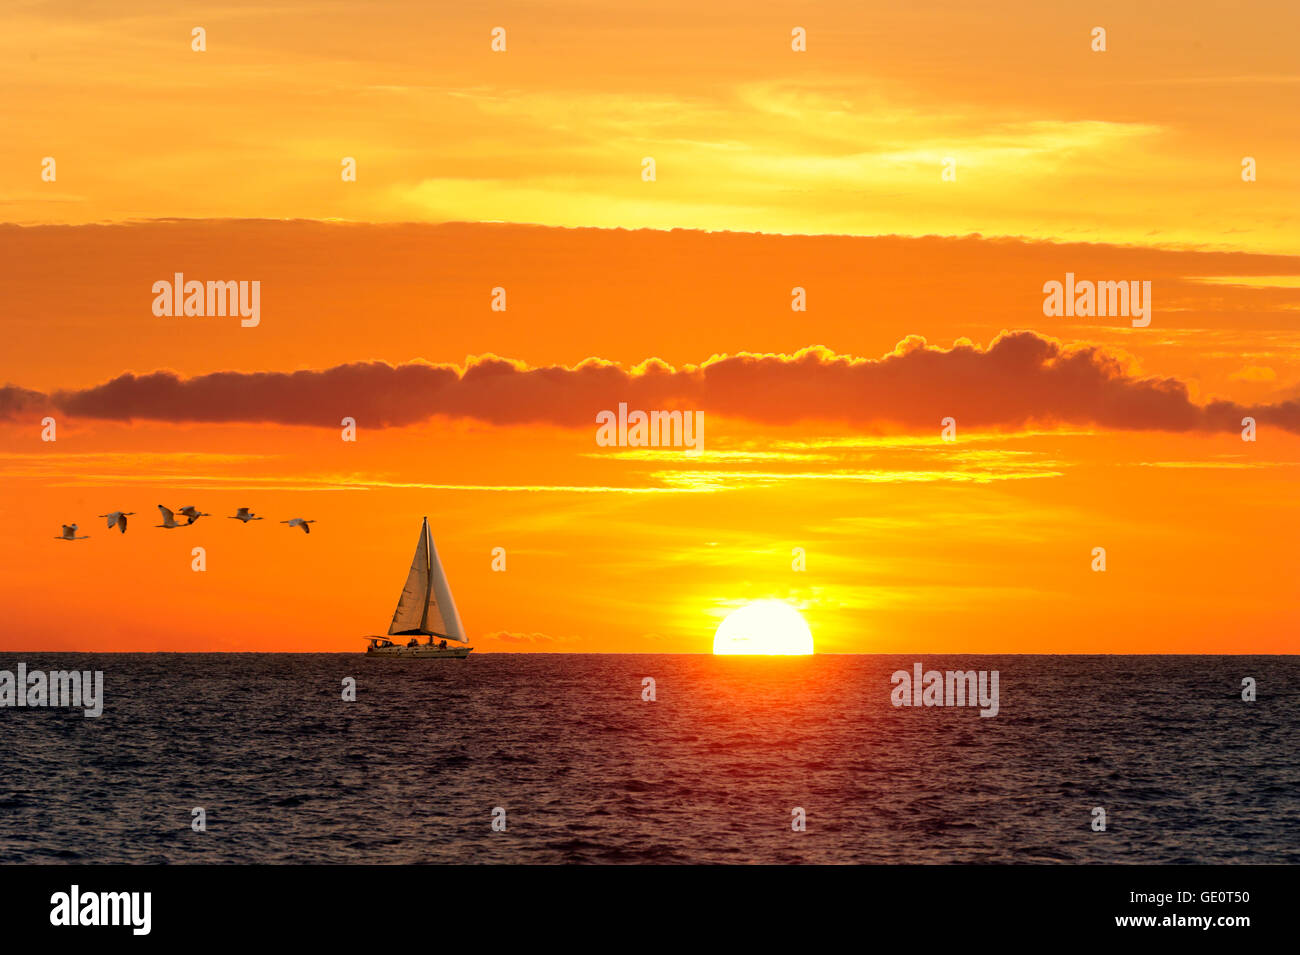 Sailboat birds is a sailboat moving along the water with large seabirds following as the sun is going down on the ocean horizon. Stock Photo